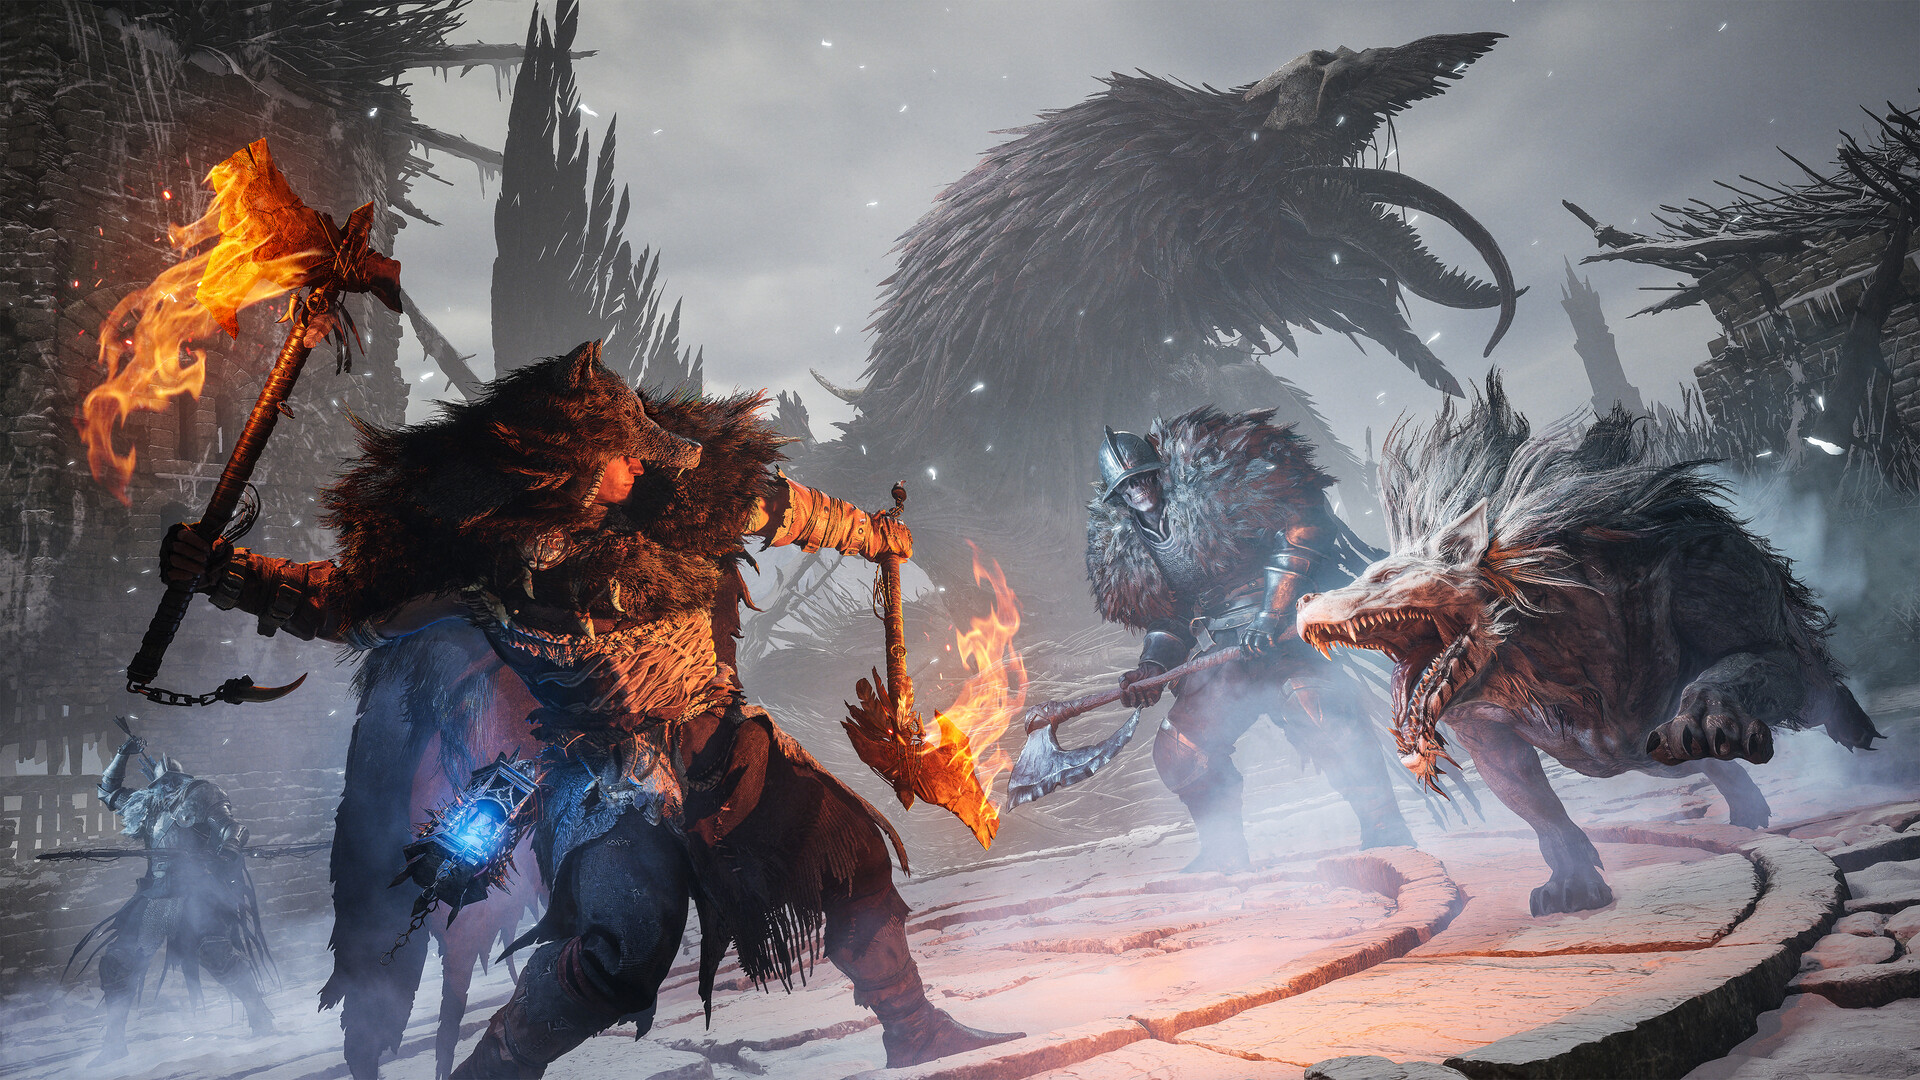 Lords of the Fallen requires a robust PC for even the minimum requirements